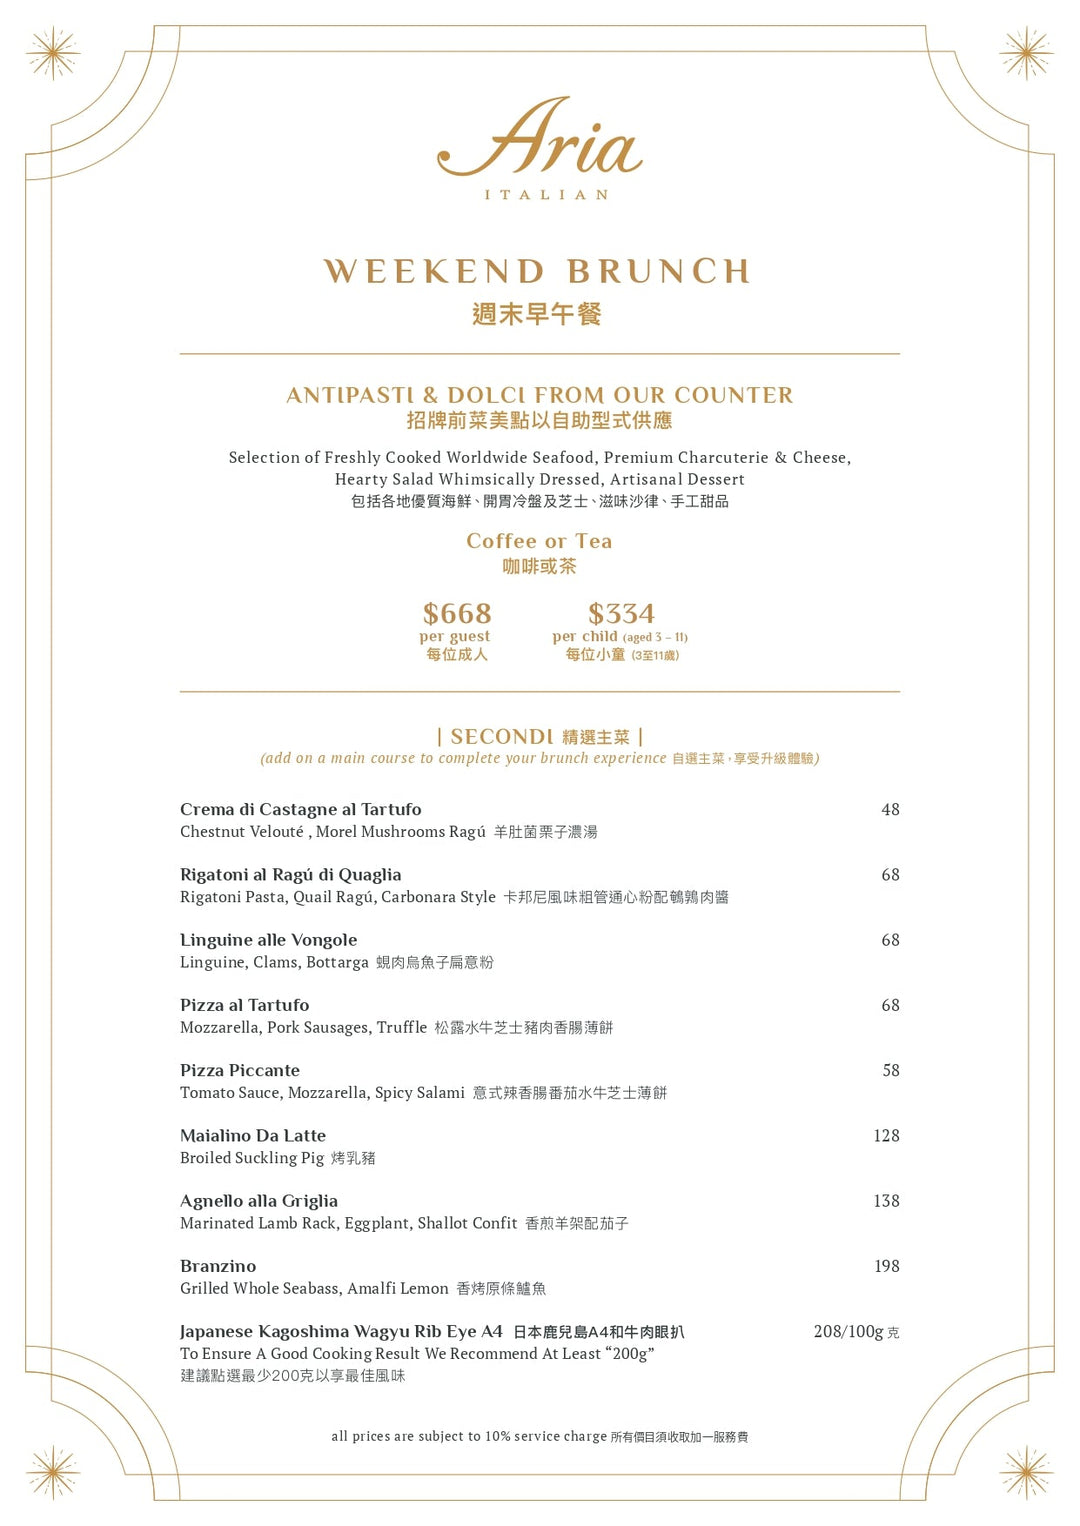 Aria Father's Day Brunch June 17 & 18